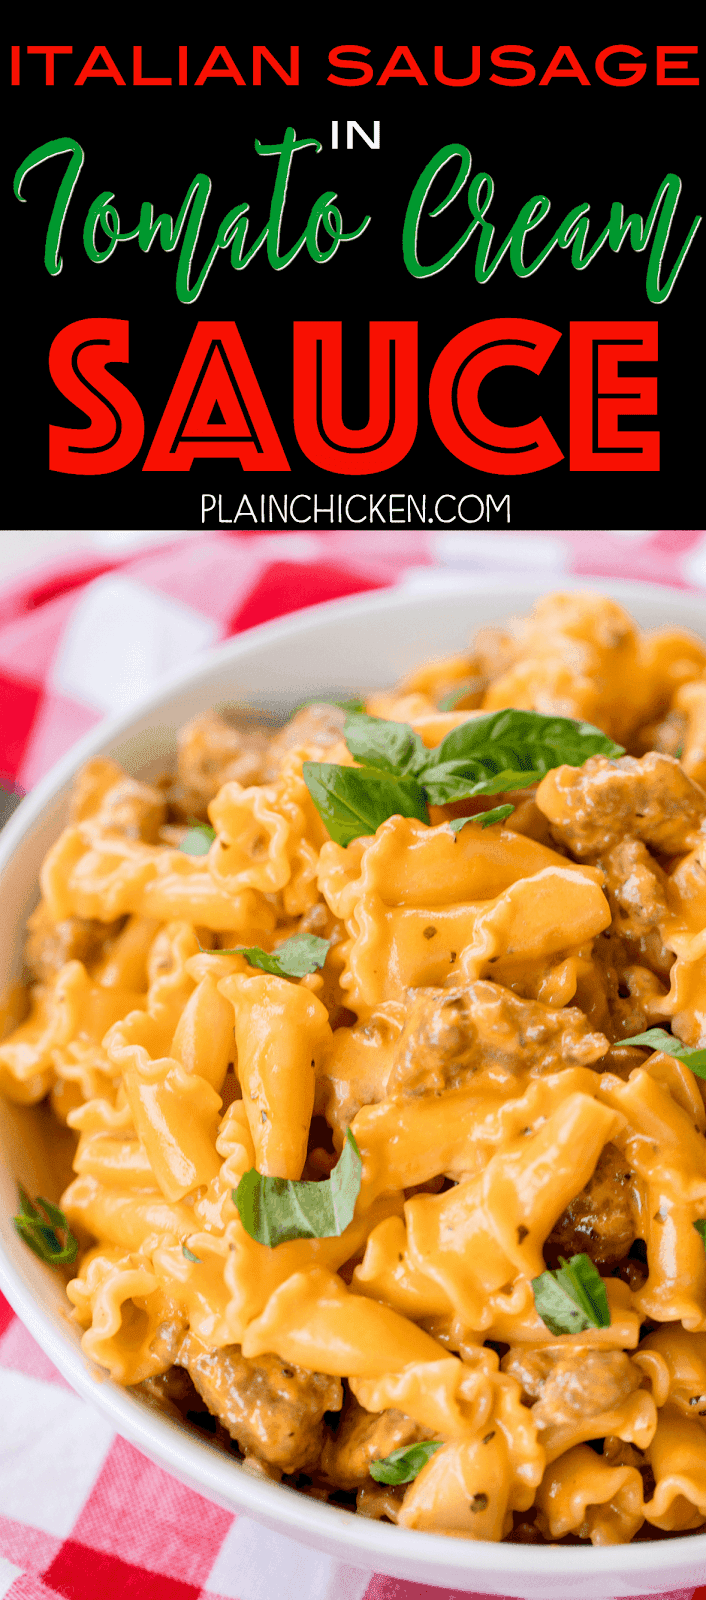 Italian Sausage in Tomato Cream Sauce - ready in 15 minutes! SO simple and tastes AMAZING! Better than any restaurant!! Pasta, Italian Sausage, heavy cream, onion, garlic, oregano, salt, pepper and tomato paste. Can add mushrooms and peppers - get creative! SO good!!!